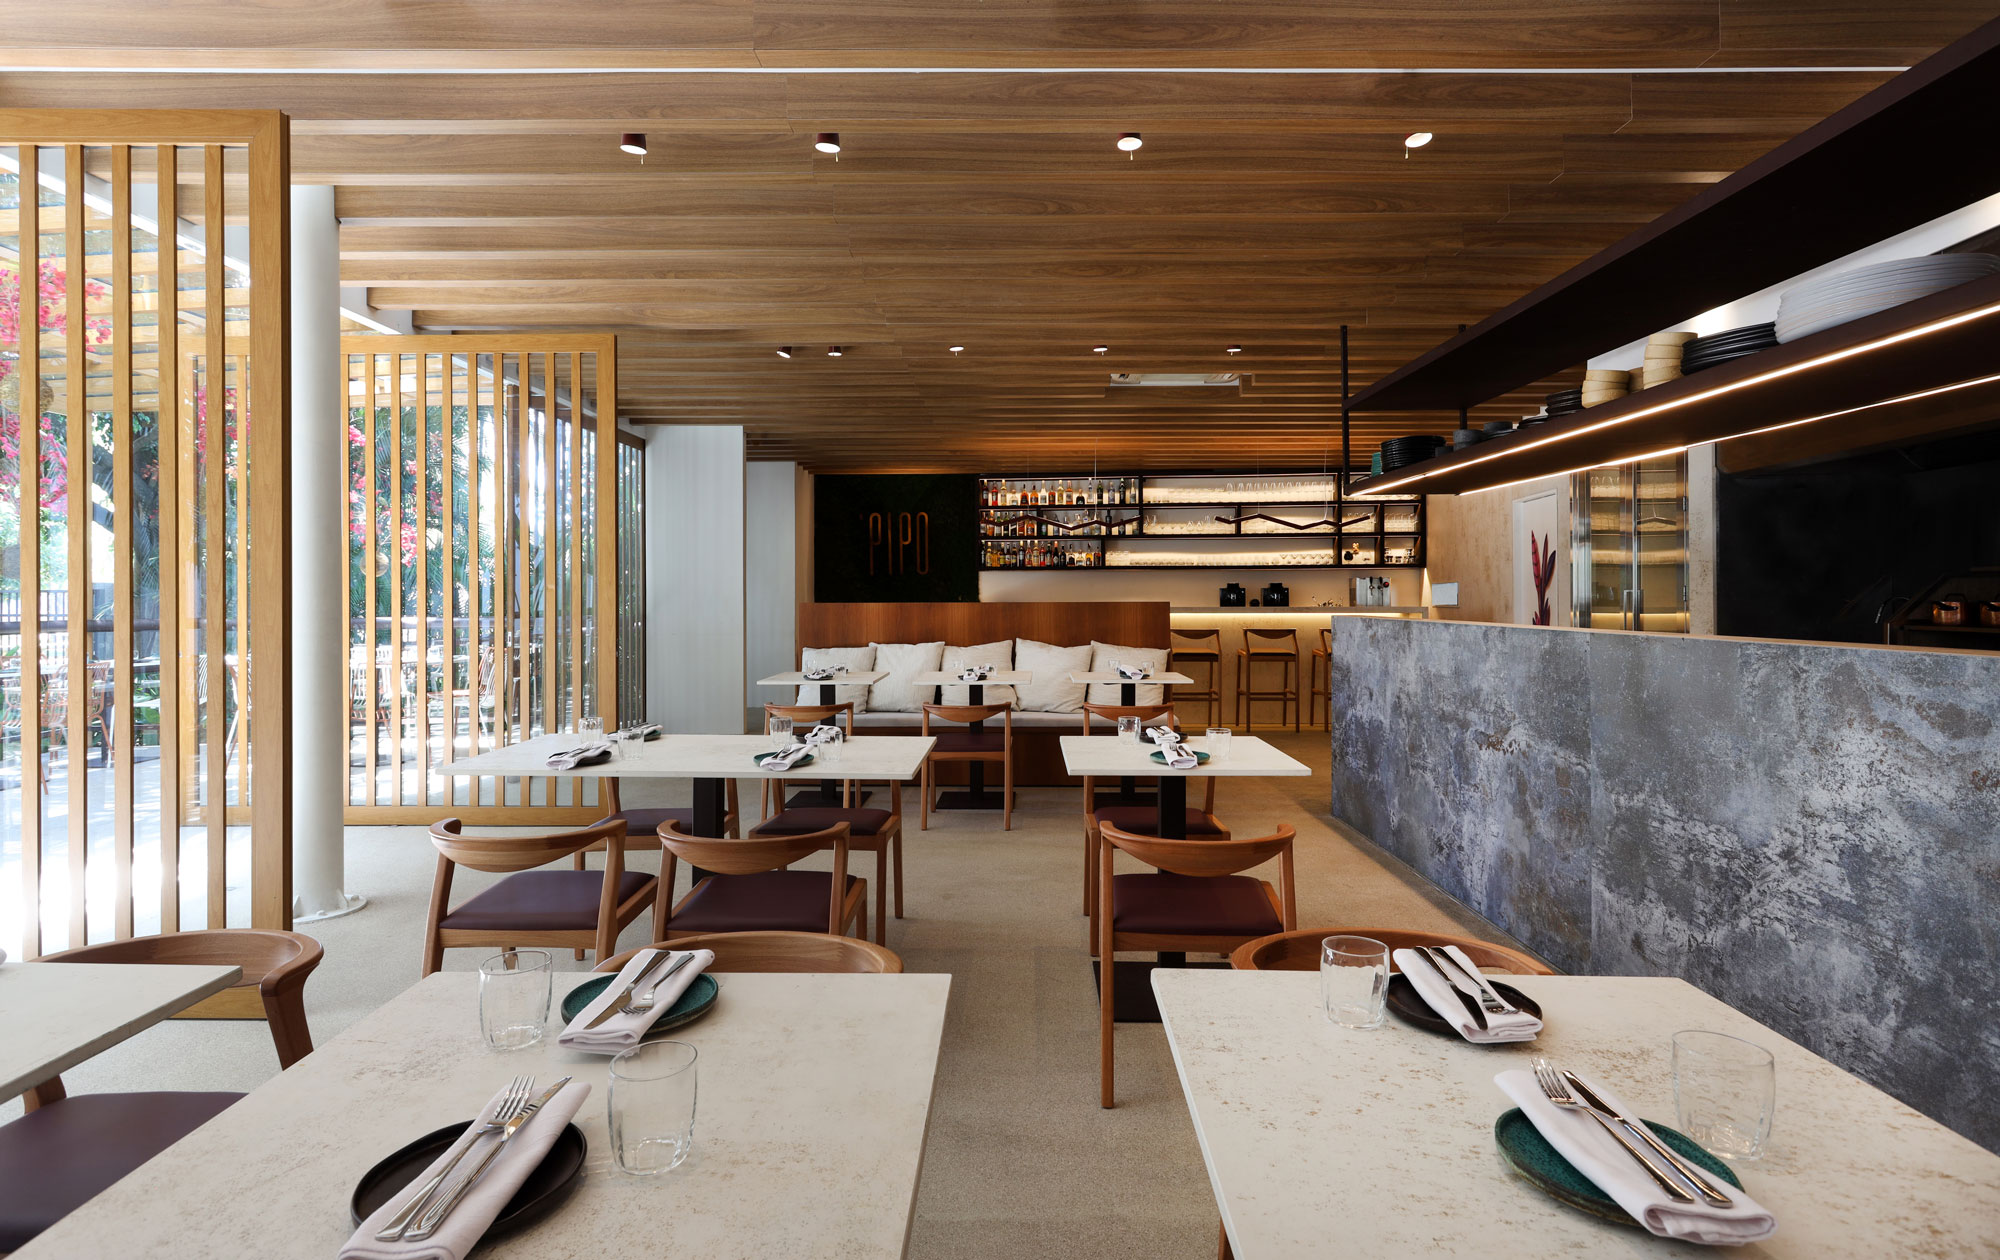 Image of Restaurante Pipo 7 in Silestone, selected for the worktop of the Hyatt Regency’s demanding dining room for its extraordinary hygienic capabilities - Cosentino